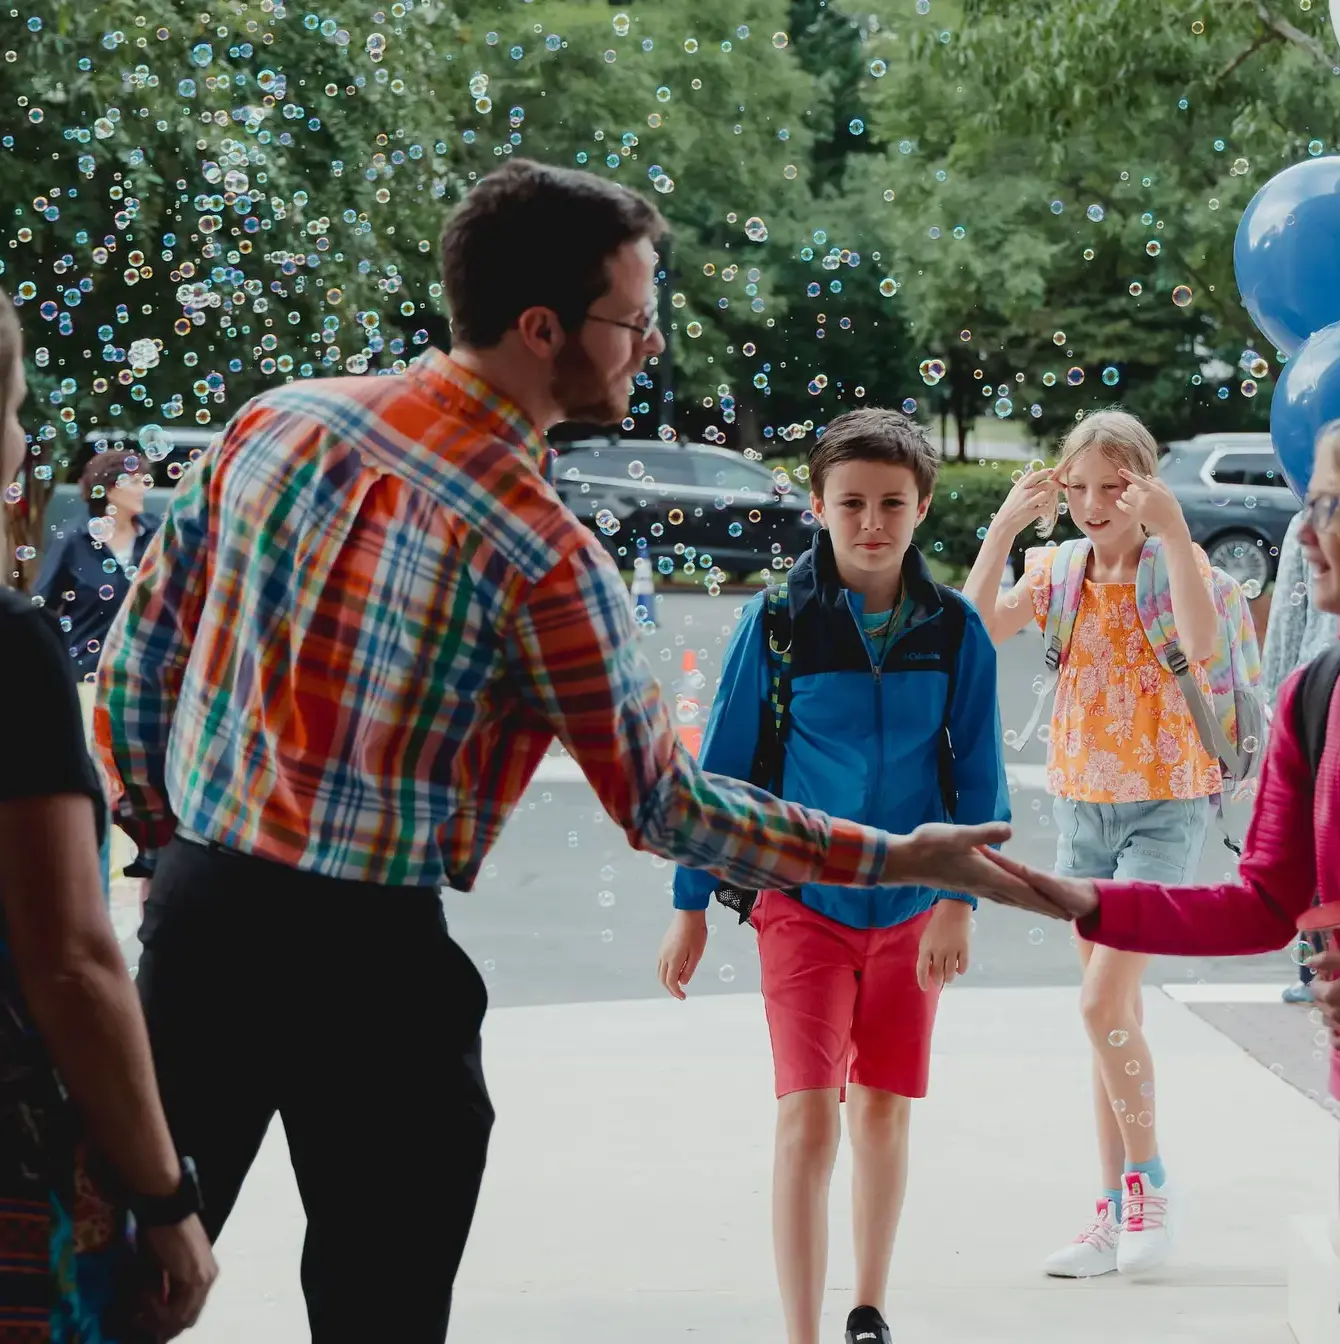 A teacher in a colorful plaid shirt greets students with a handshake at the school entrance, surrounded by a festive atmosphere with floating bubbles and balloons in the background.